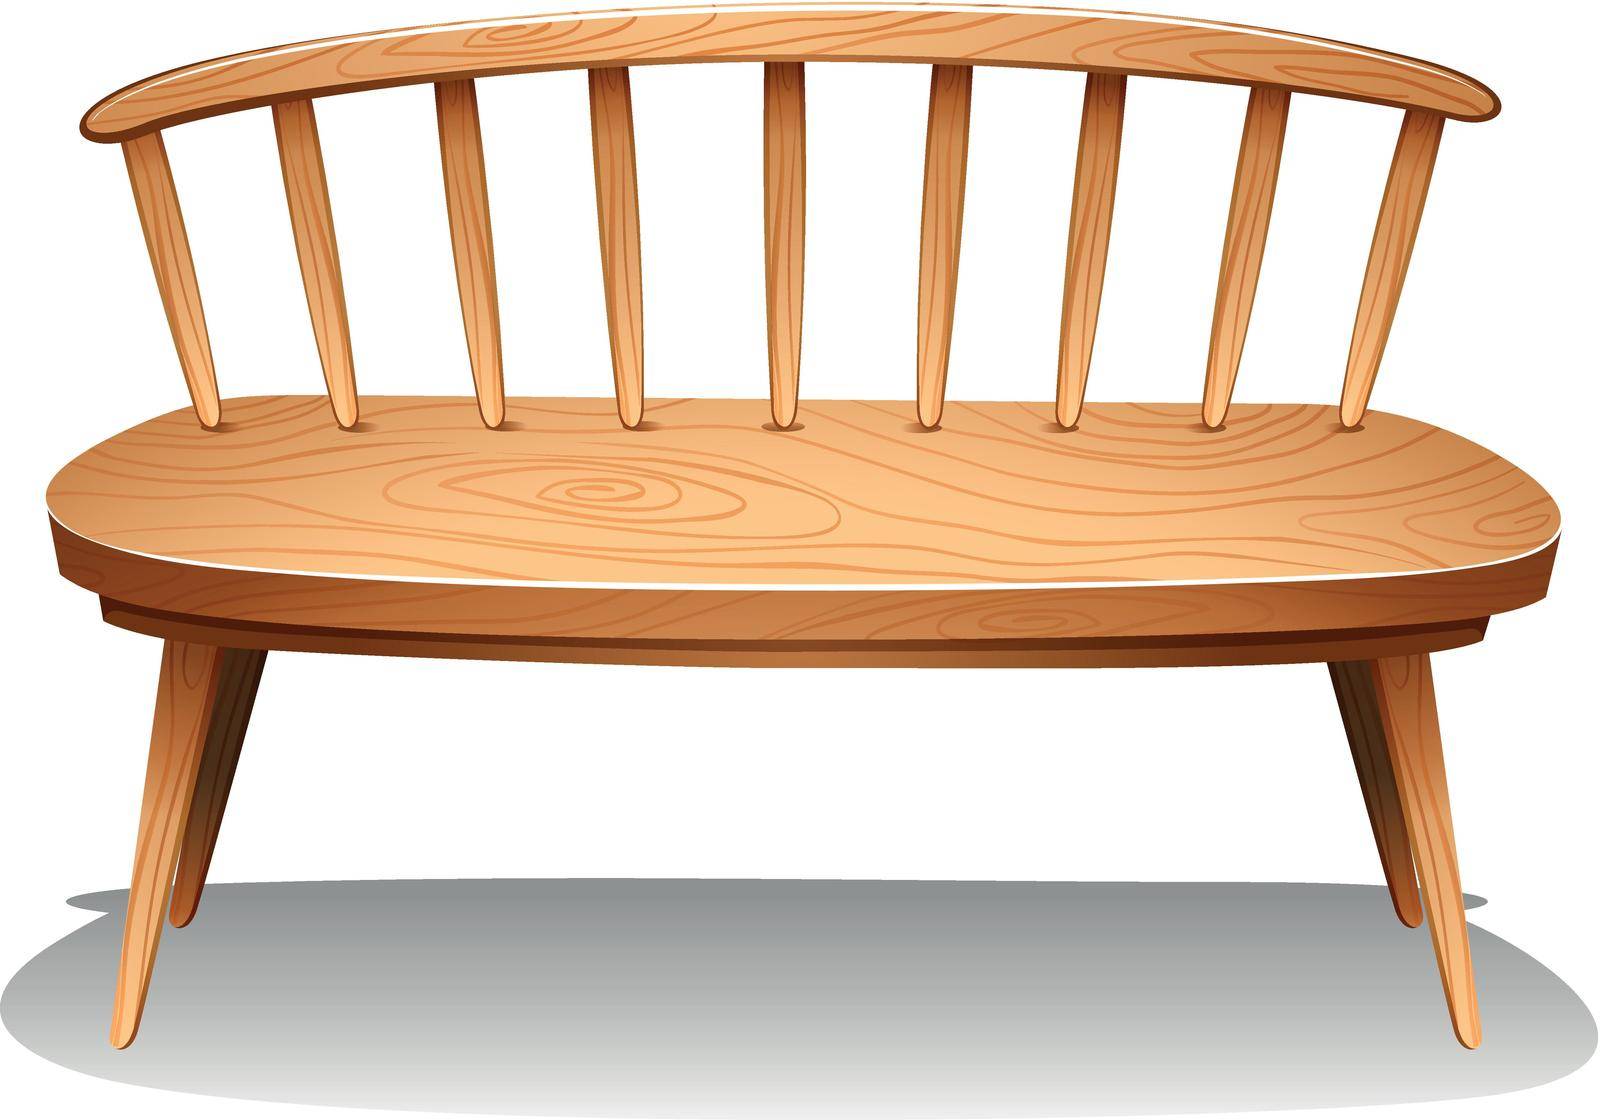 Illustration of a brown wooden furniture on a white background